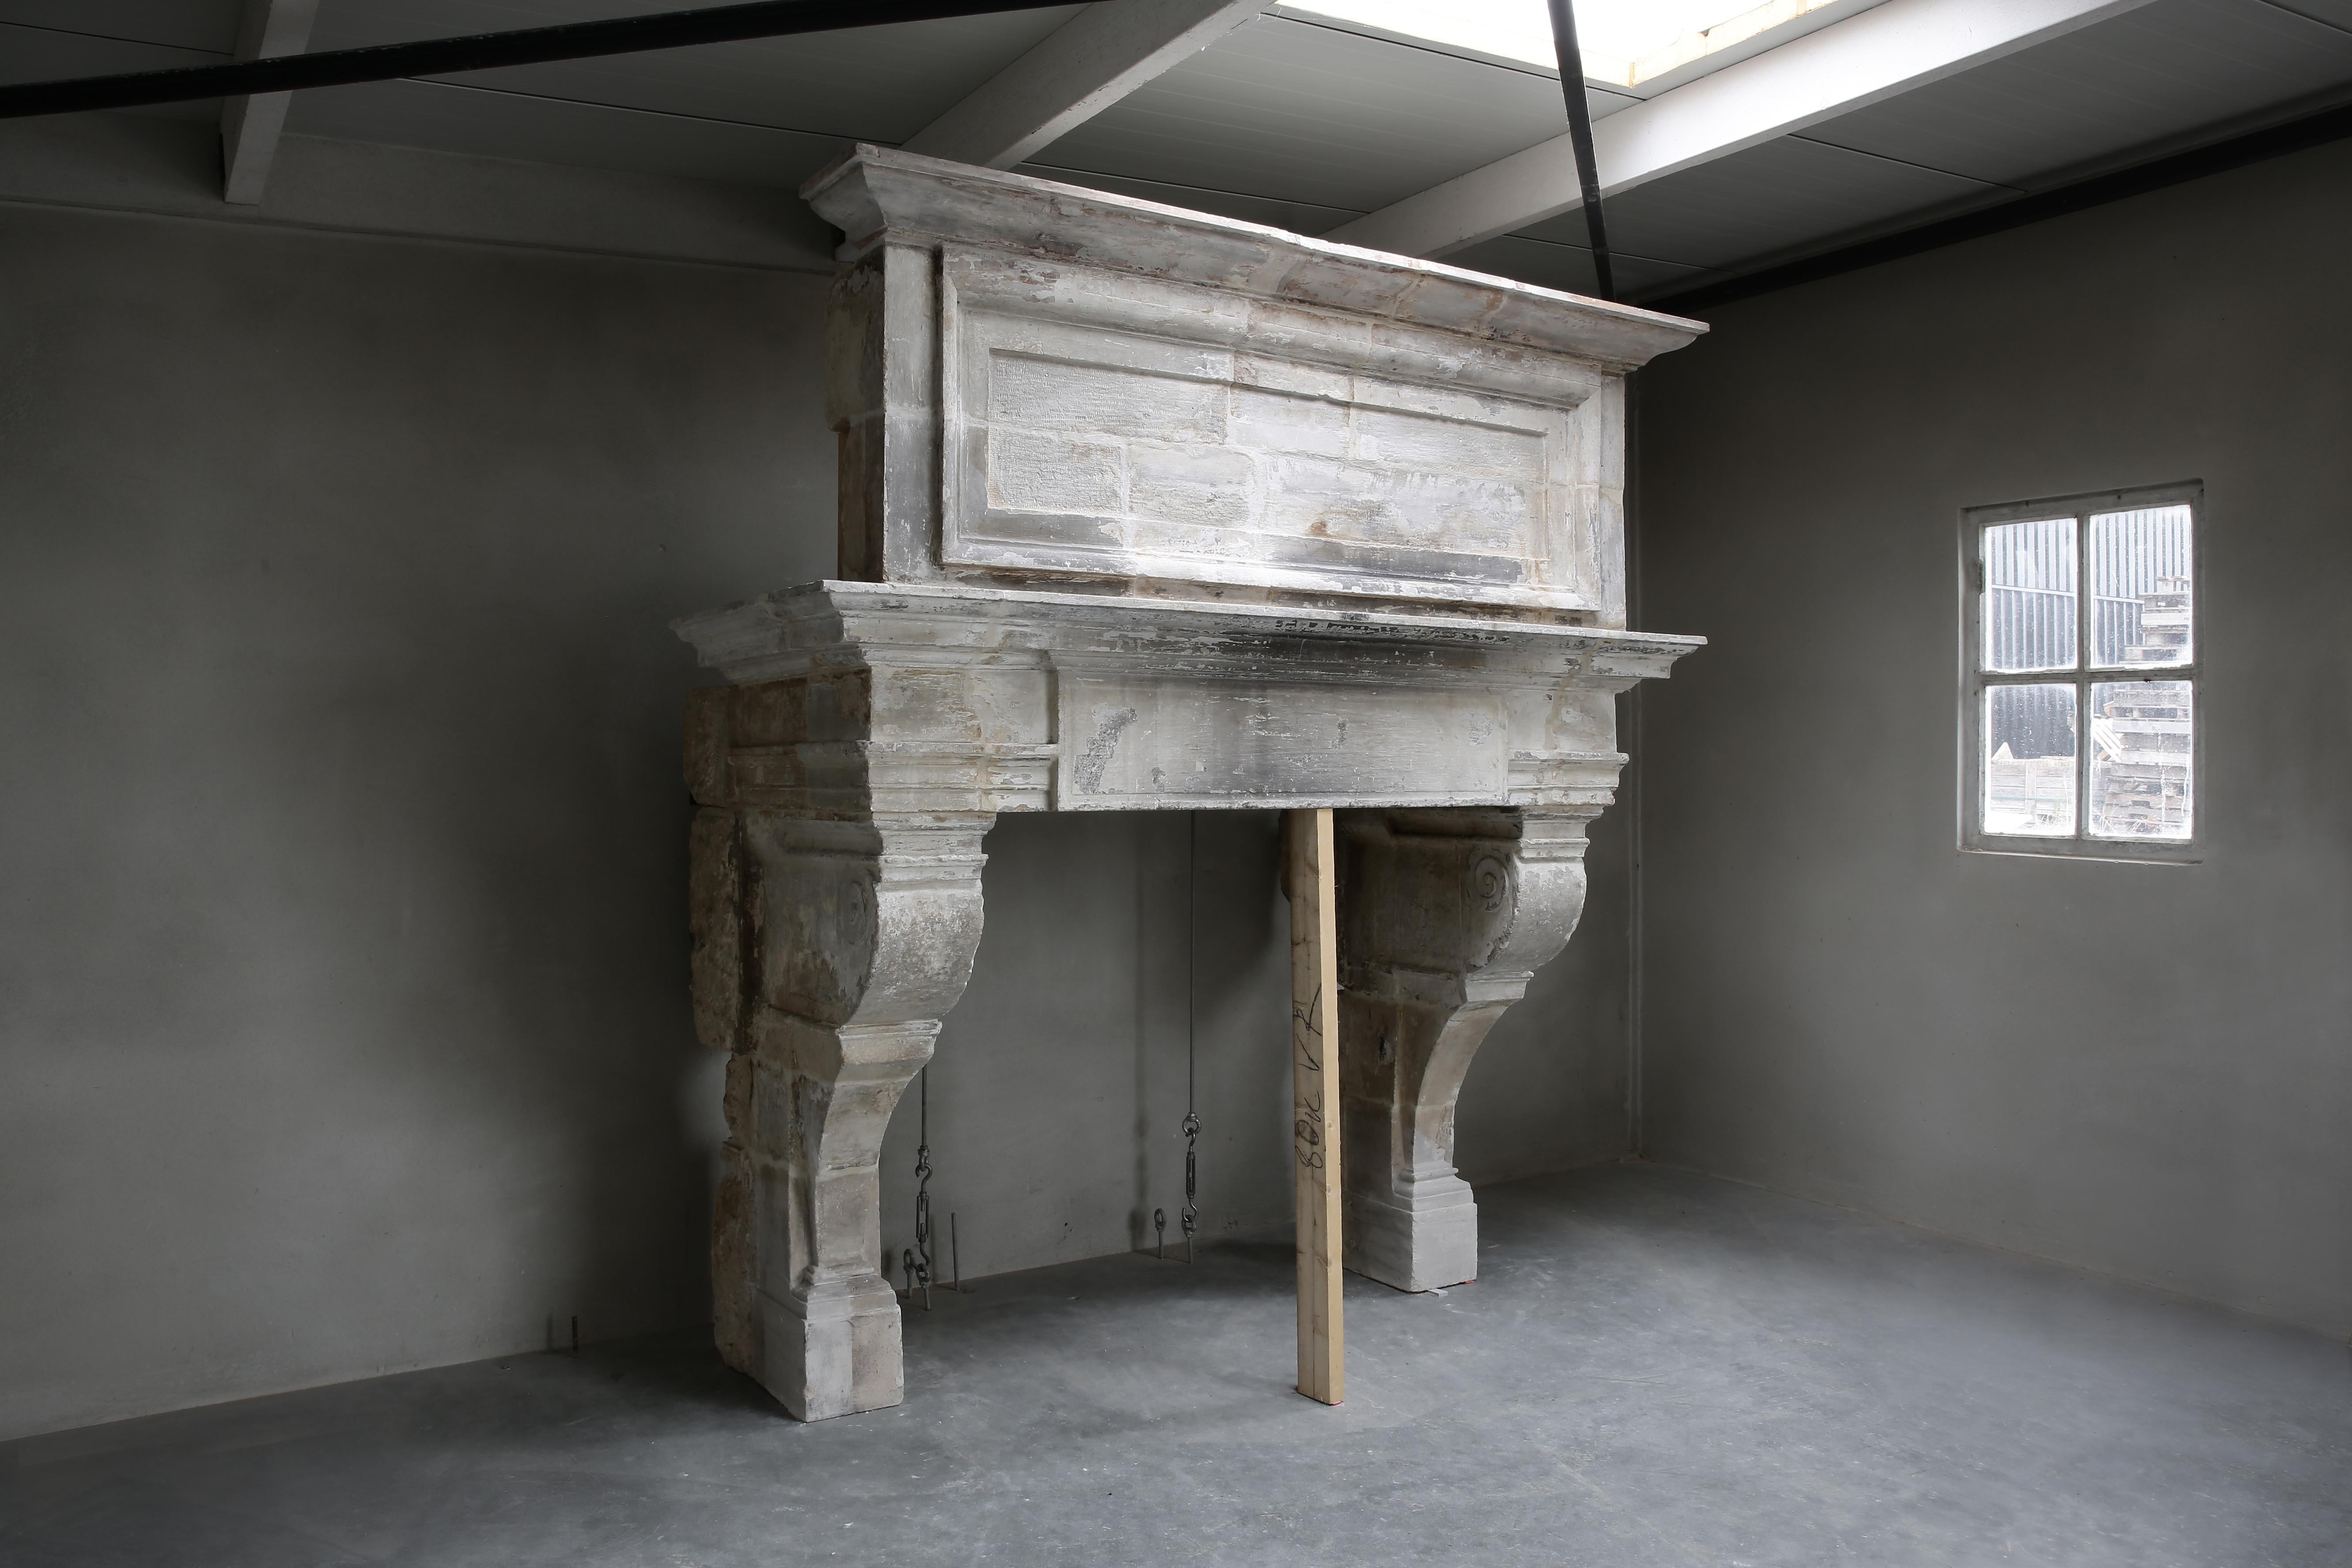 A beautiful castle fireplace of French limestone with Trumeau. This fireplace dates from the 19th century and is in the style of Louis XIII. A robust mantel (fireplace) with beautiful lines and a stately appearance! The Trumeau on top of the